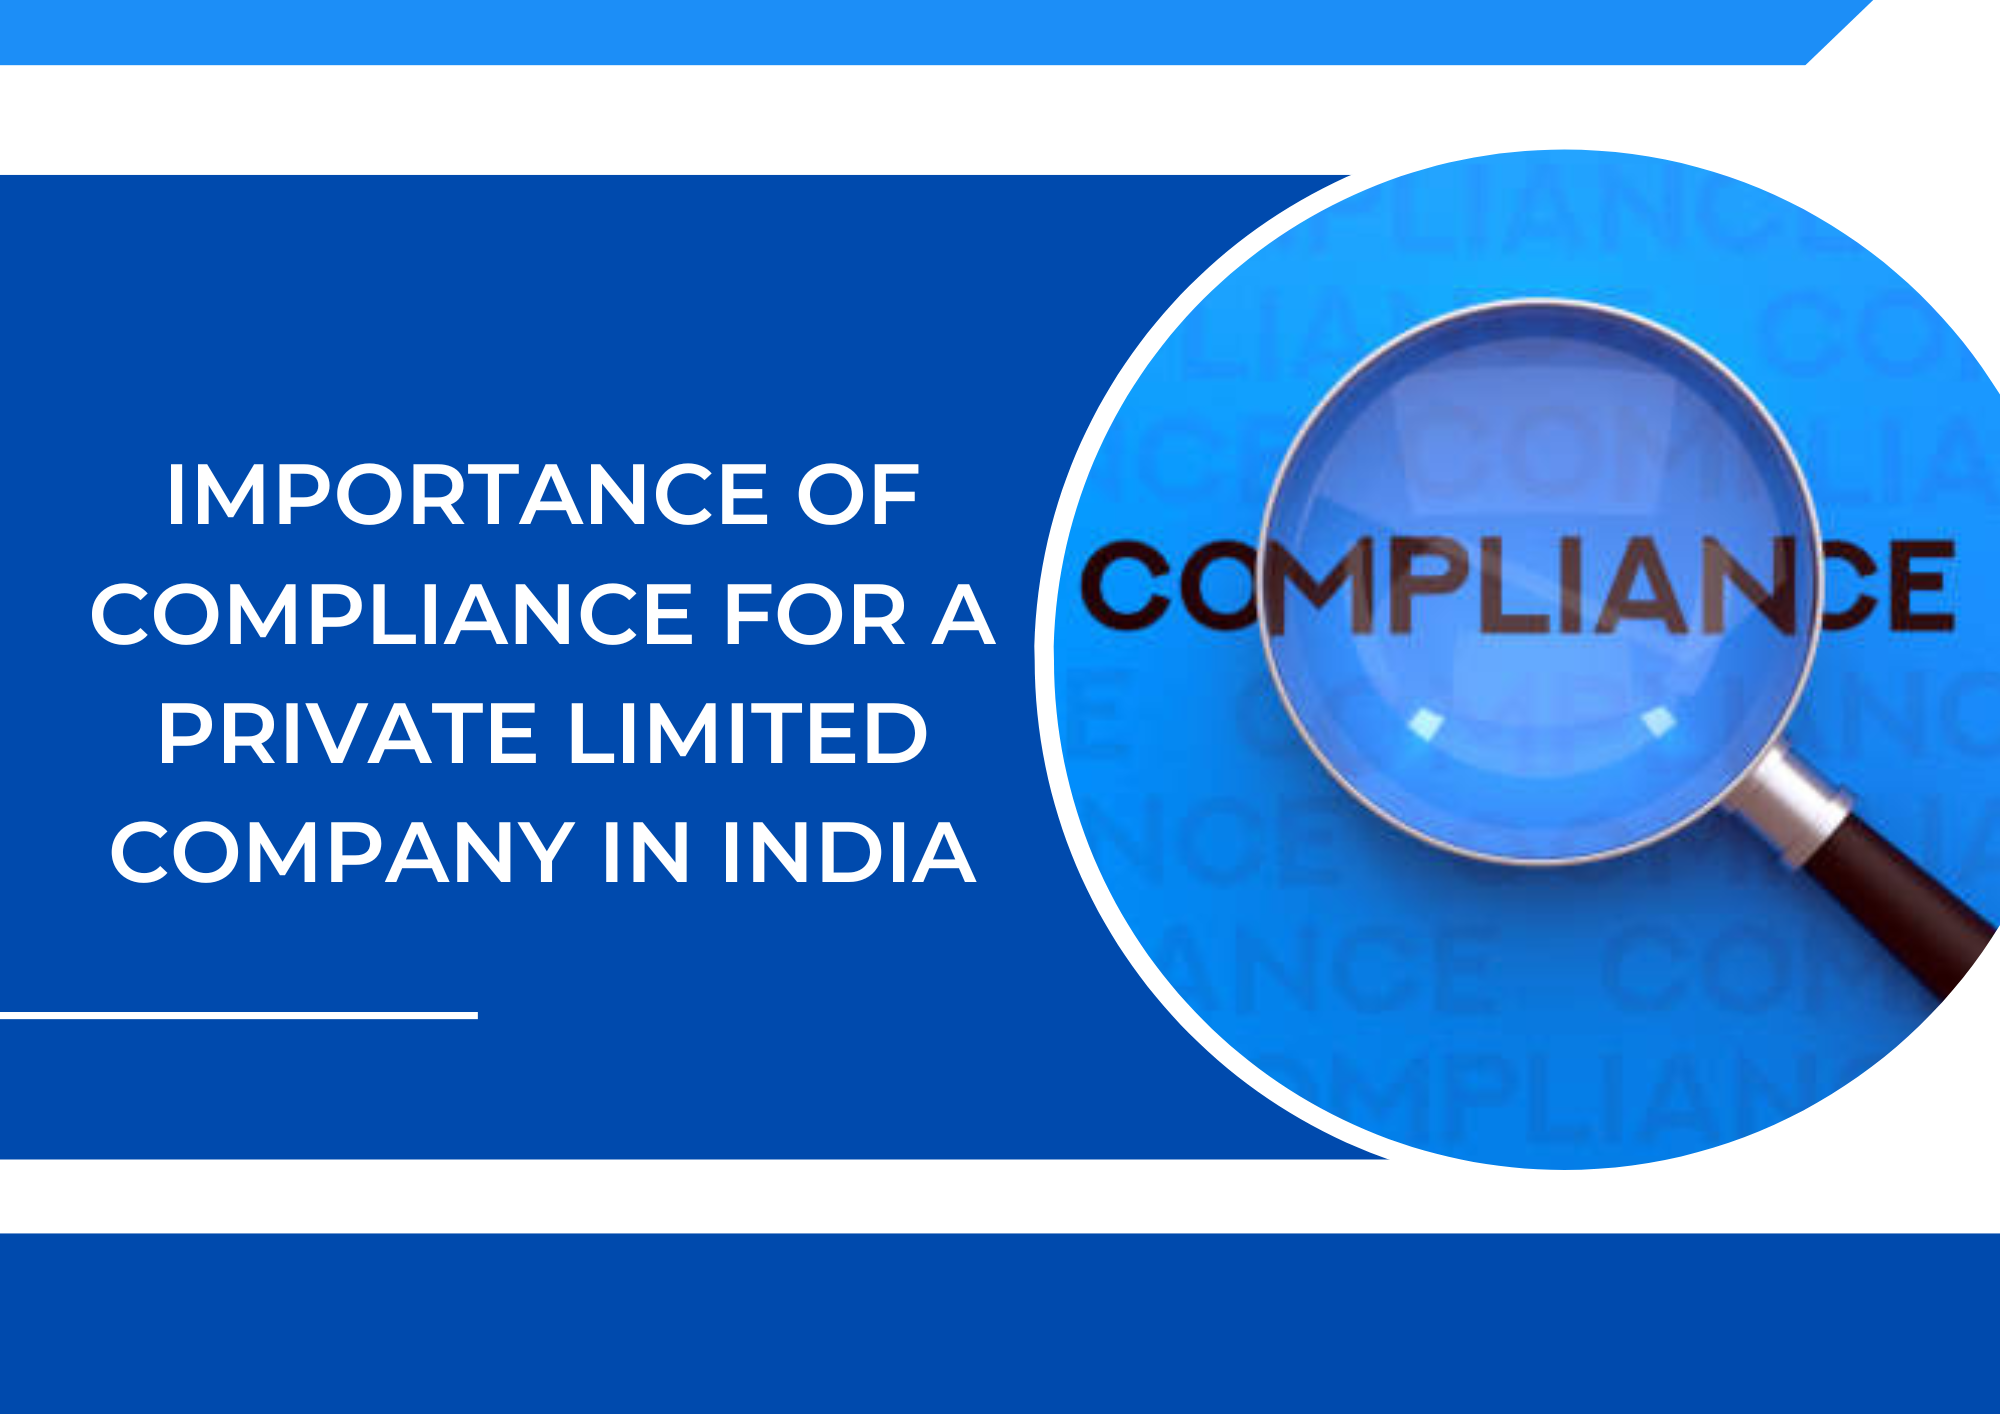 Importance of Compliance for a Private Limited Company in India